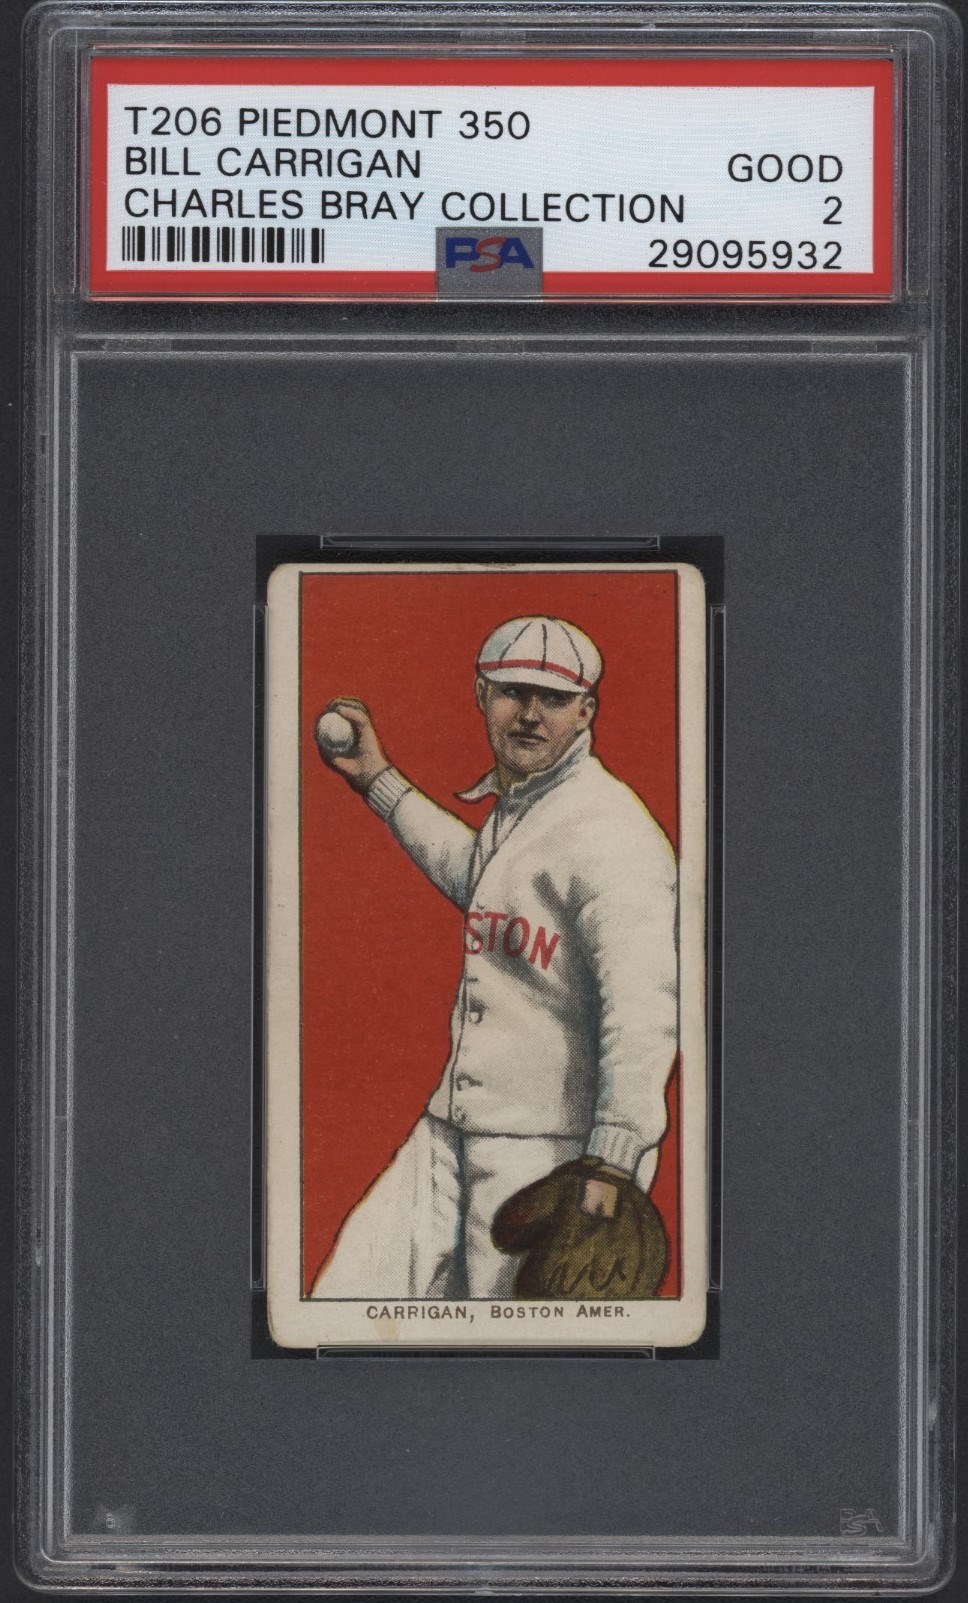 - T206 Piedmont 350 Bill Carrigan PSA 2 From the Charles Bray Collection